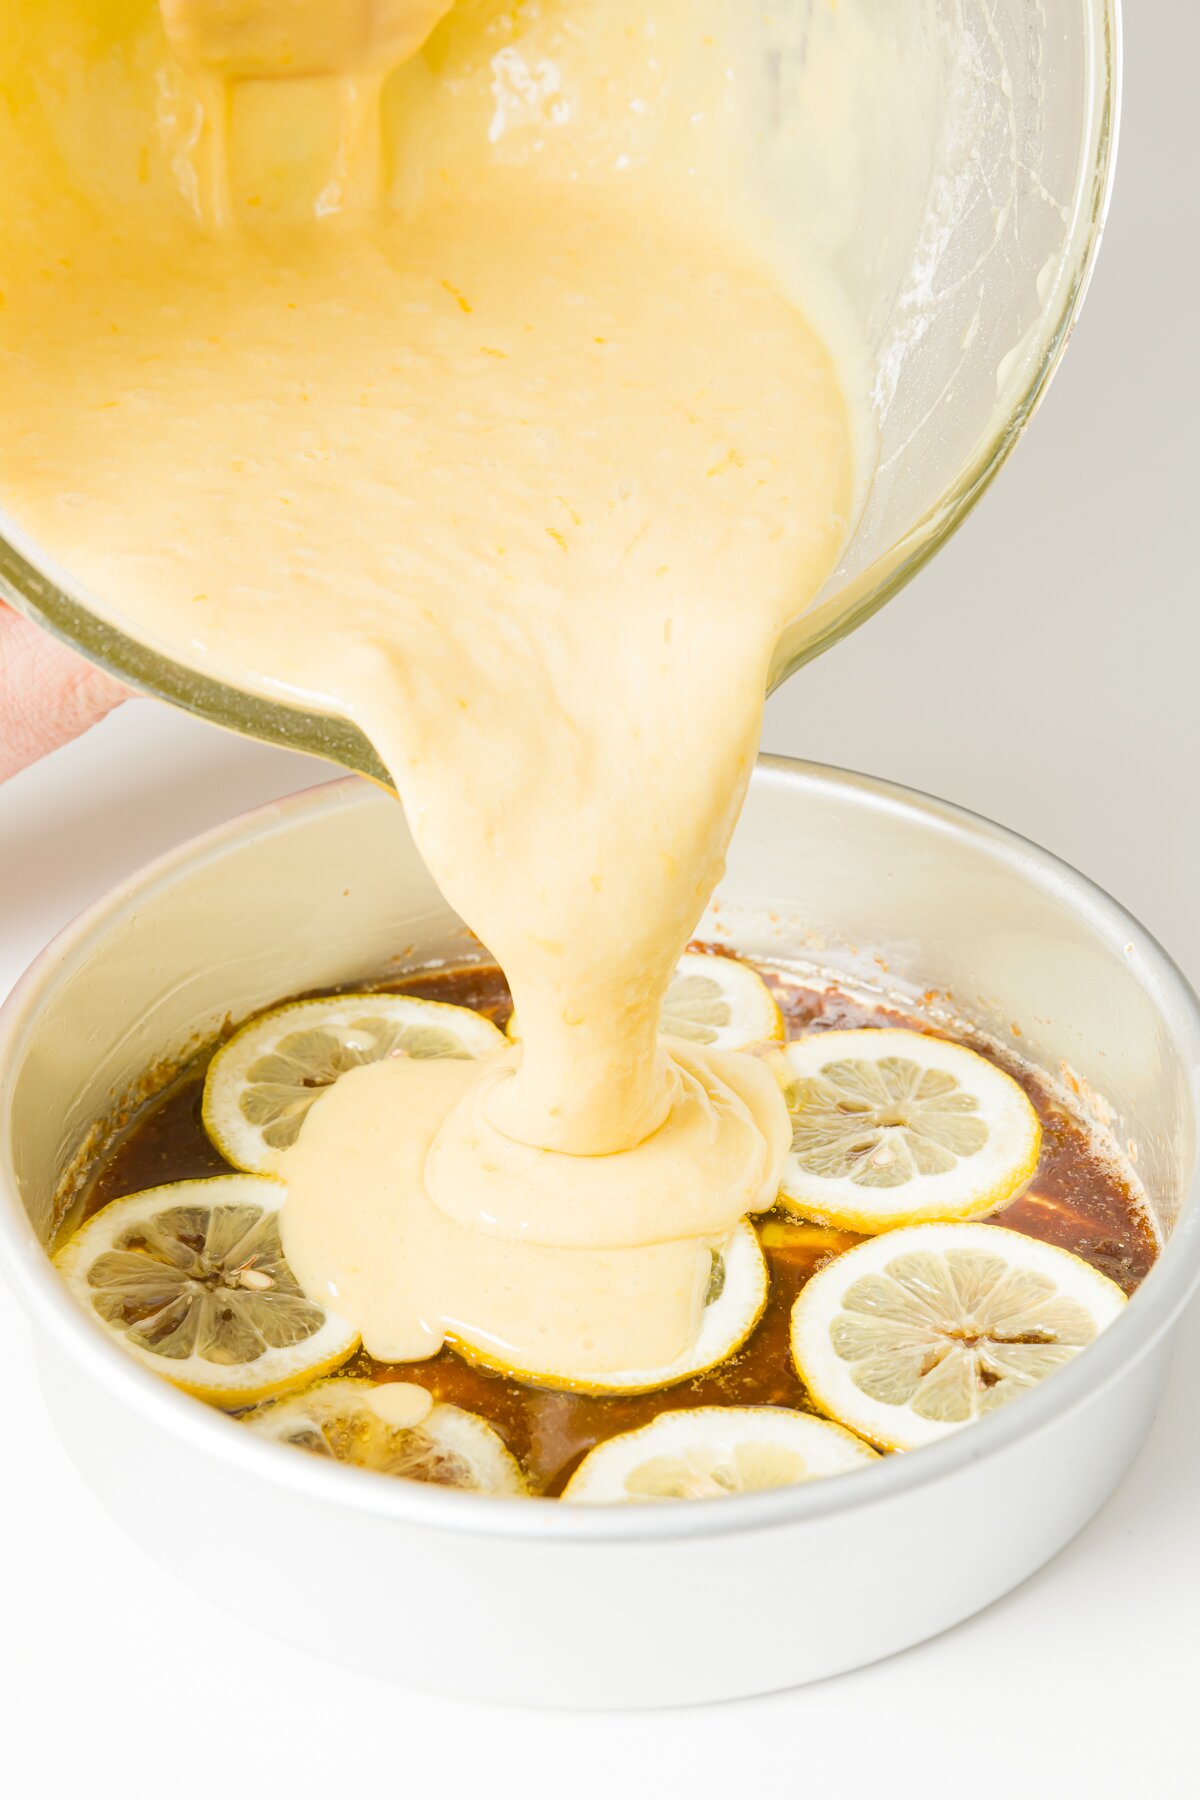 Pouring batter over pan with lemons in it